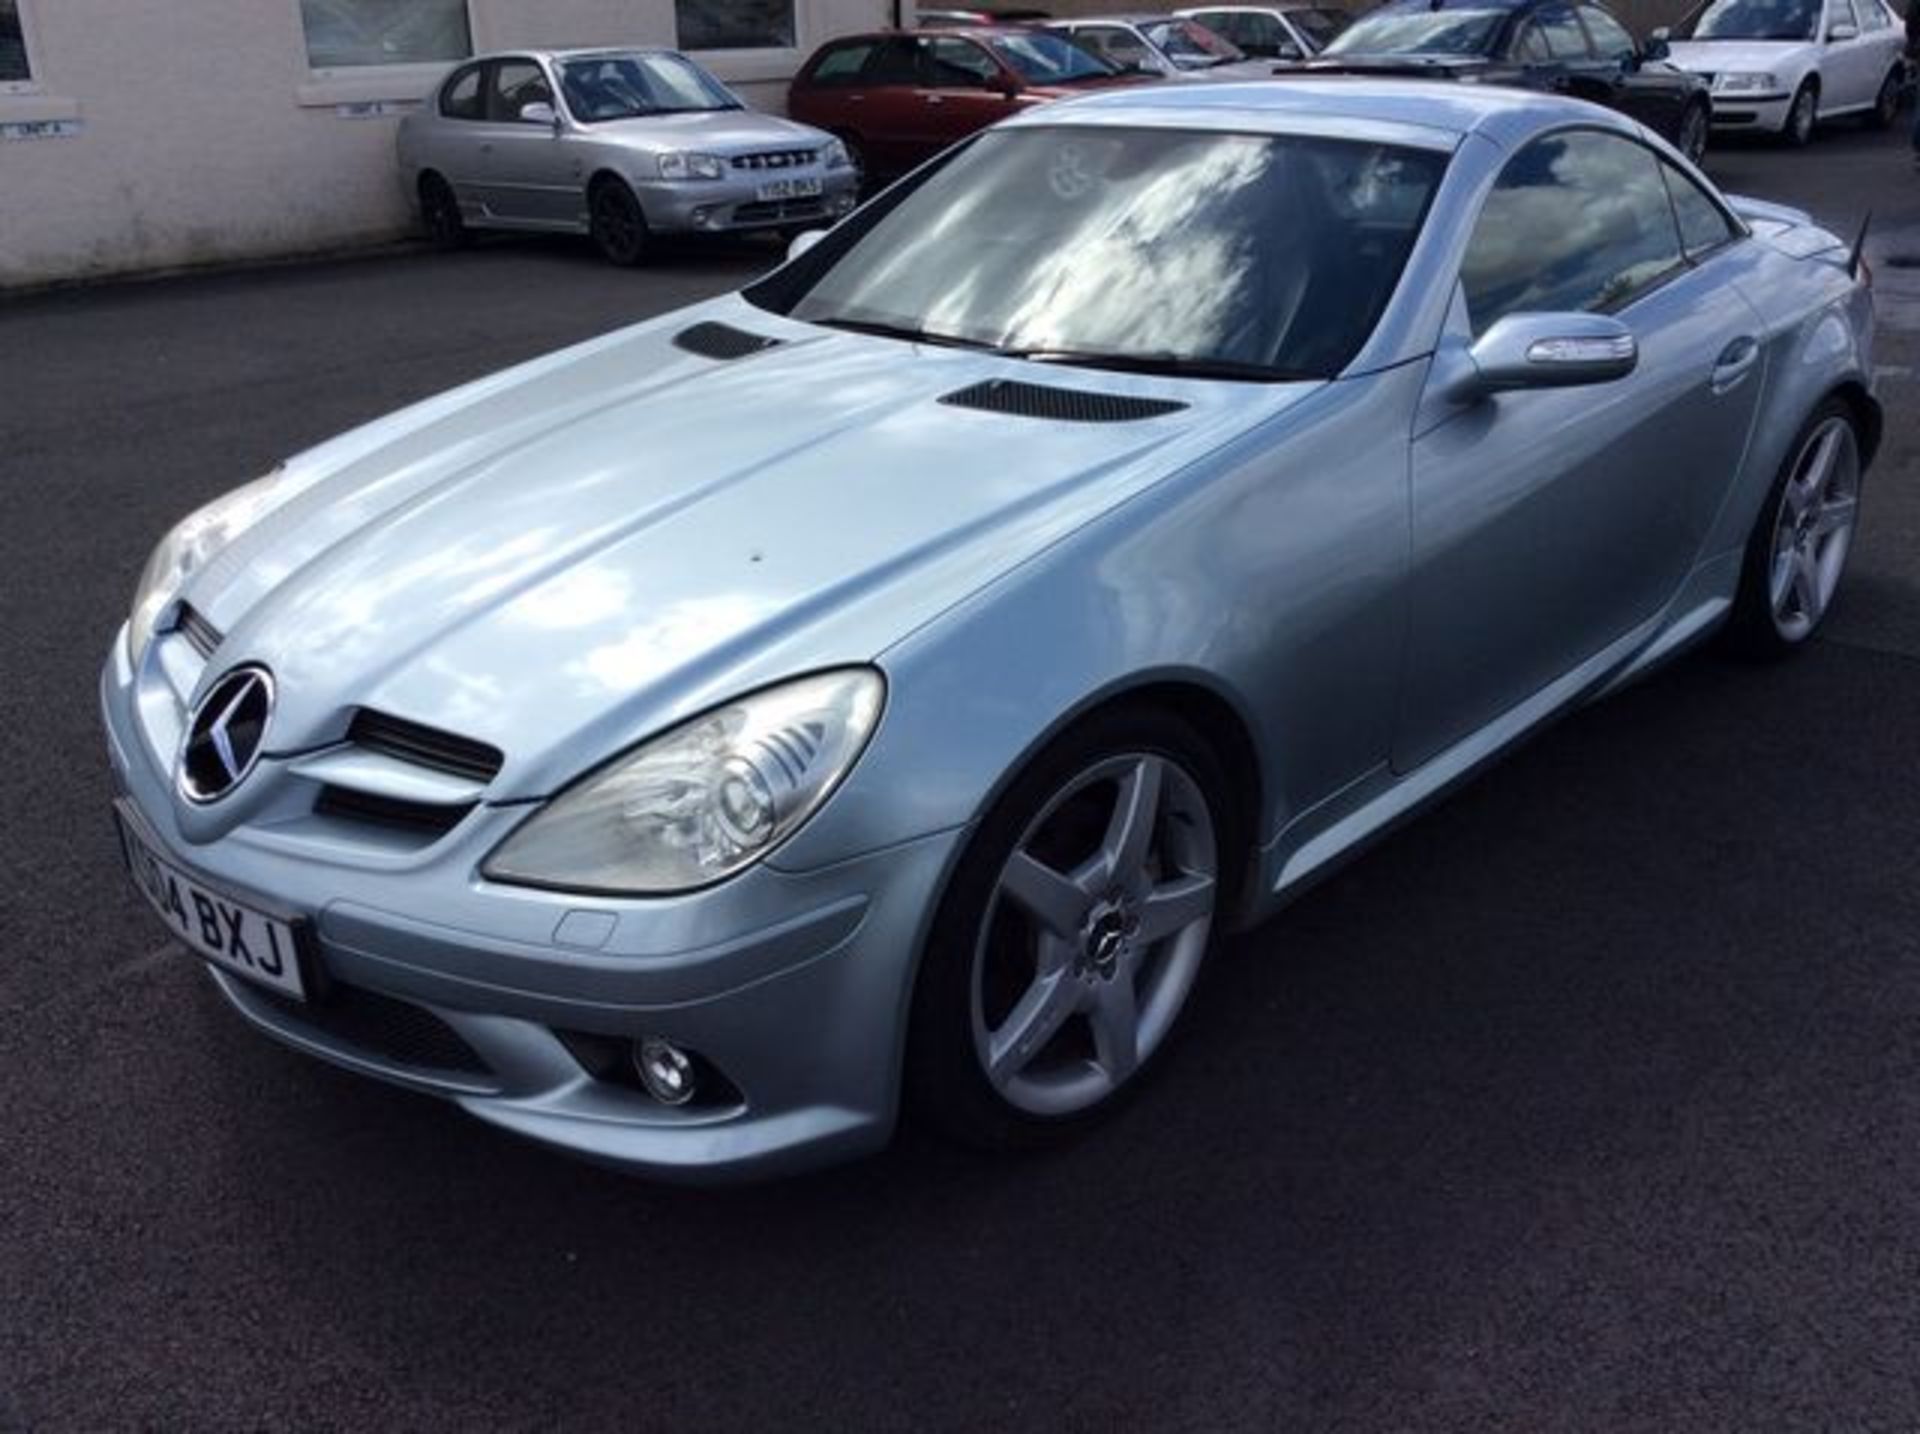 MERCEDES, SLK 350 AUTO - 3498cc, Chassis number WDB1714562F014423 - this highly appointed example